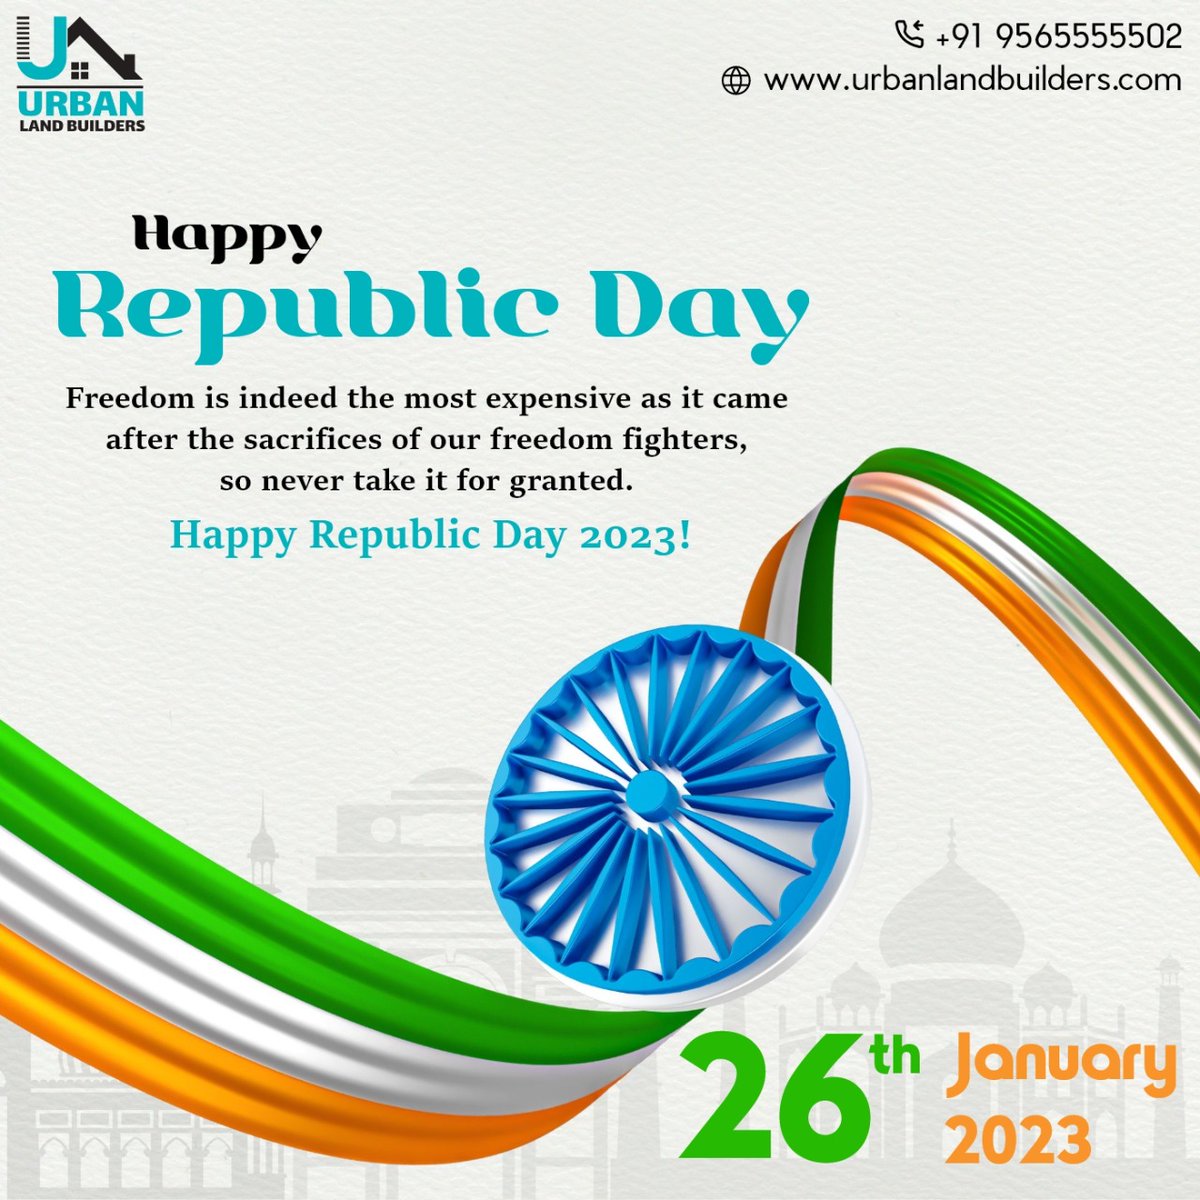 'Happy Republic Day, everyone!!

Freedom of thought, strength in our convictions, and pride in our heritage. Let’s salute our brave martyrs on Republic Day. 

#happyrepublicday #26thjanuary #UrbanLandBuilders